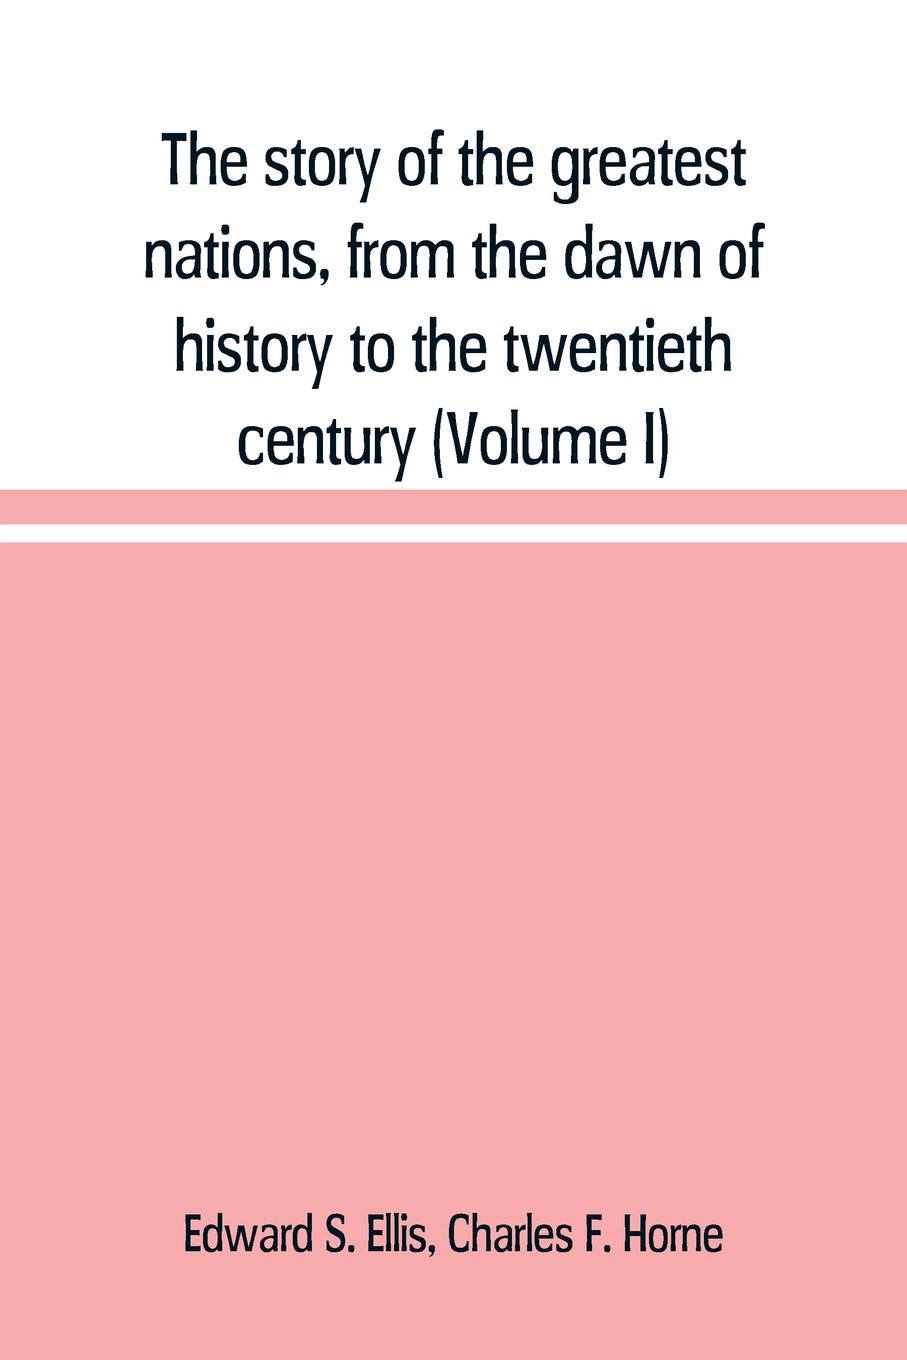 The story of the greatest nations, from the dawn of history to the twentieth century. a comprehensive history, founded upon the leading authorities, including a complete chronology of the world, and a pronouncing vocabulary of each nation (Volume I)